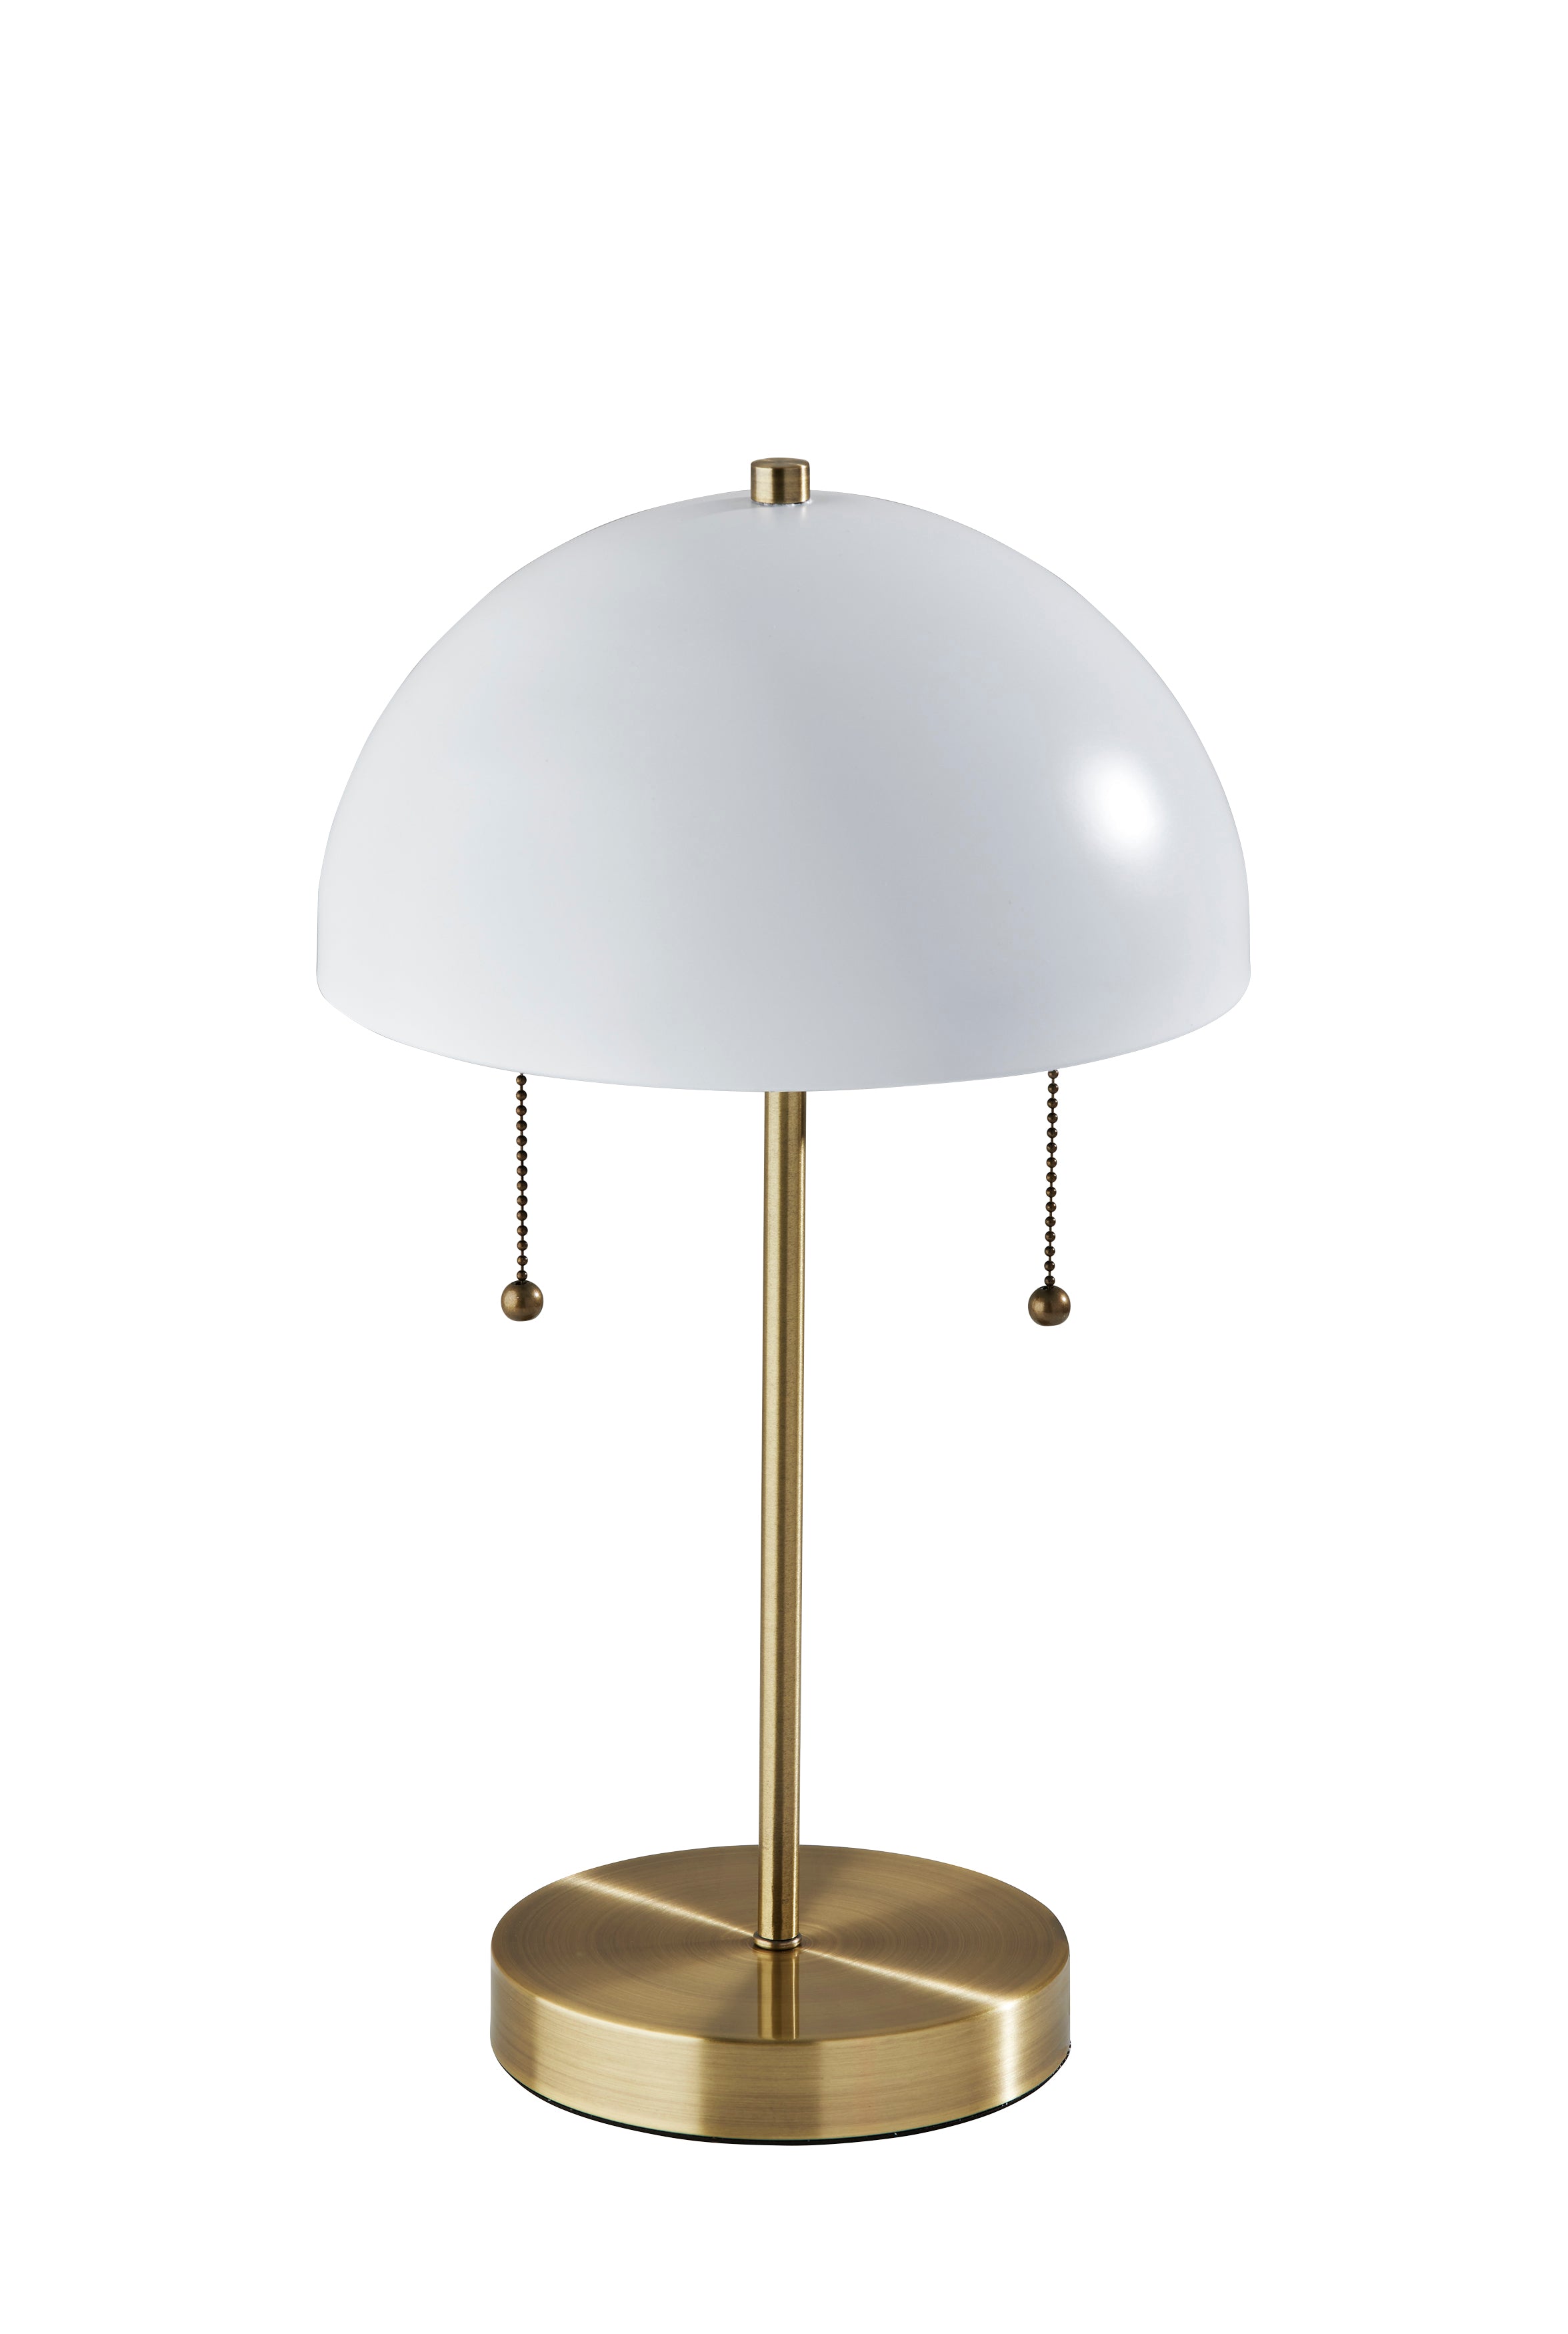 BOWIE Lampe sur table Or, Blanc - 5132-02 | ADESSO